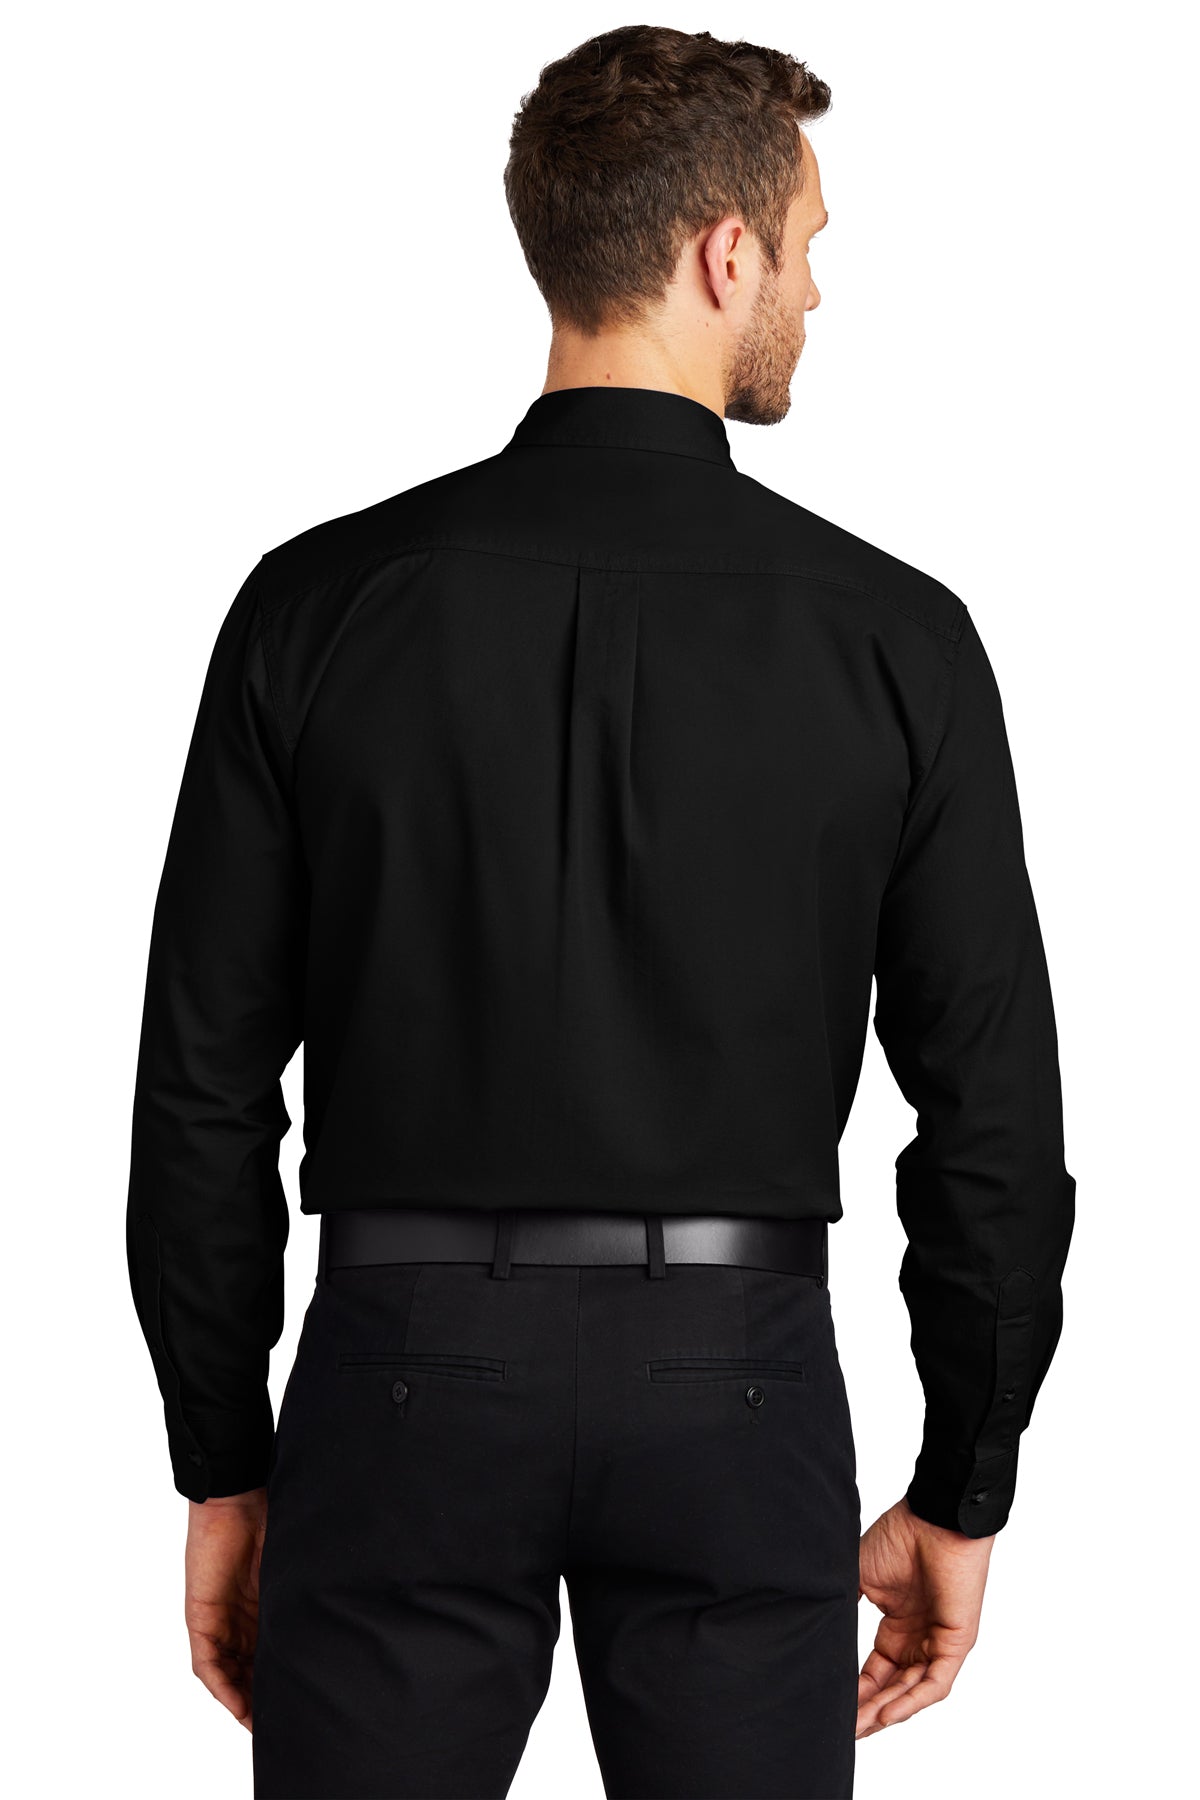 Port Authority Tall Branded Twill Shirts, Black